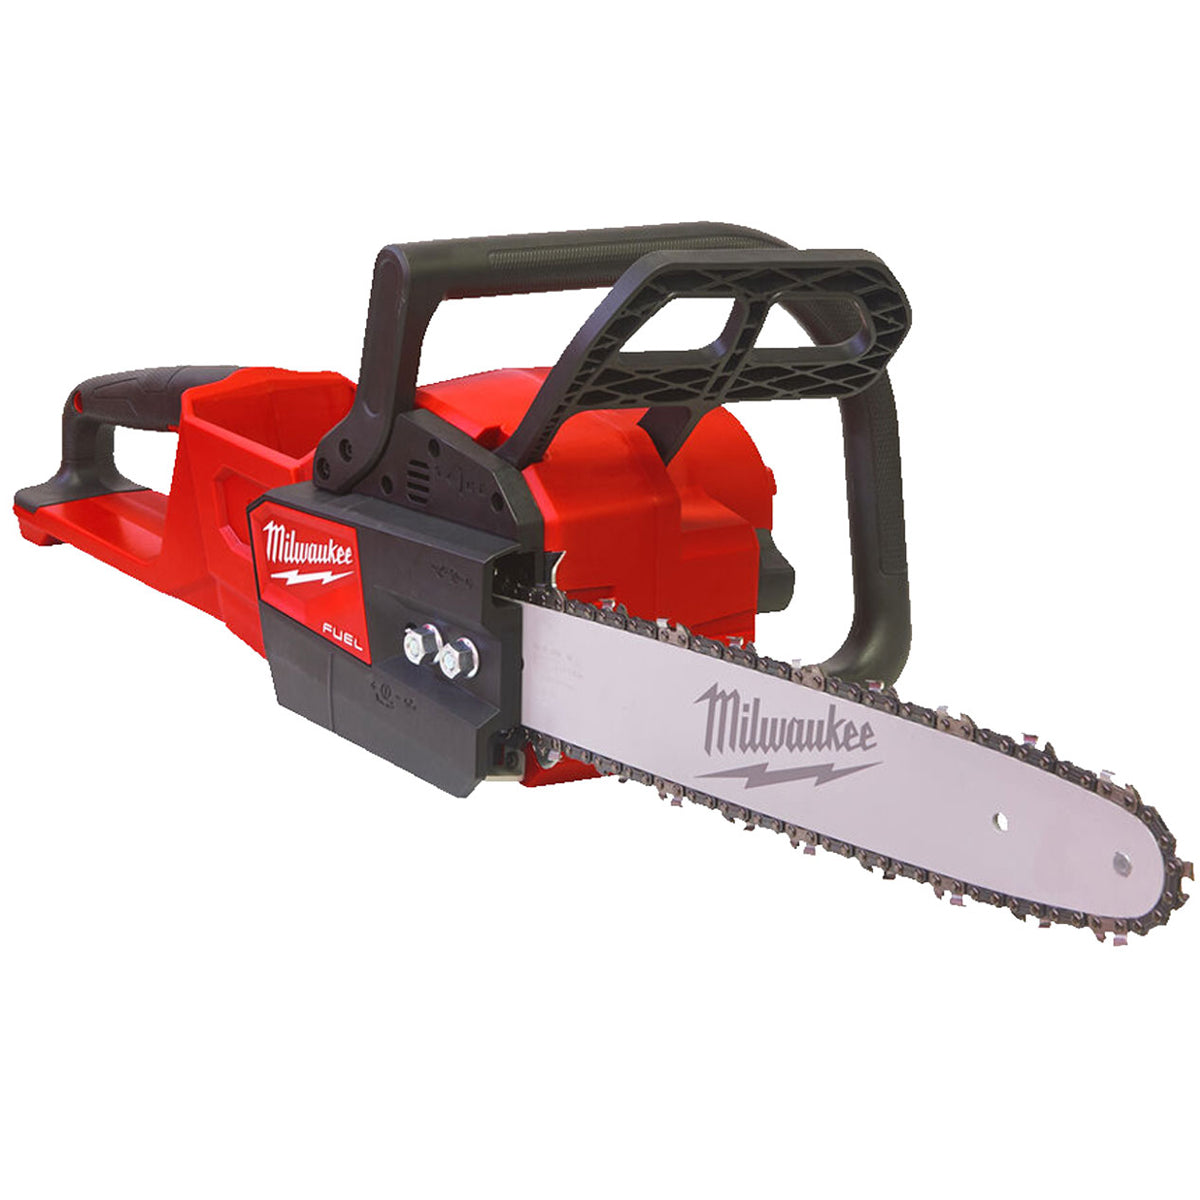 Milwaukee M18FCHS35-0 18V Fuel Brushless Chainsaw 35cm Bar with 2 x 5.0Ah Battery & Charger